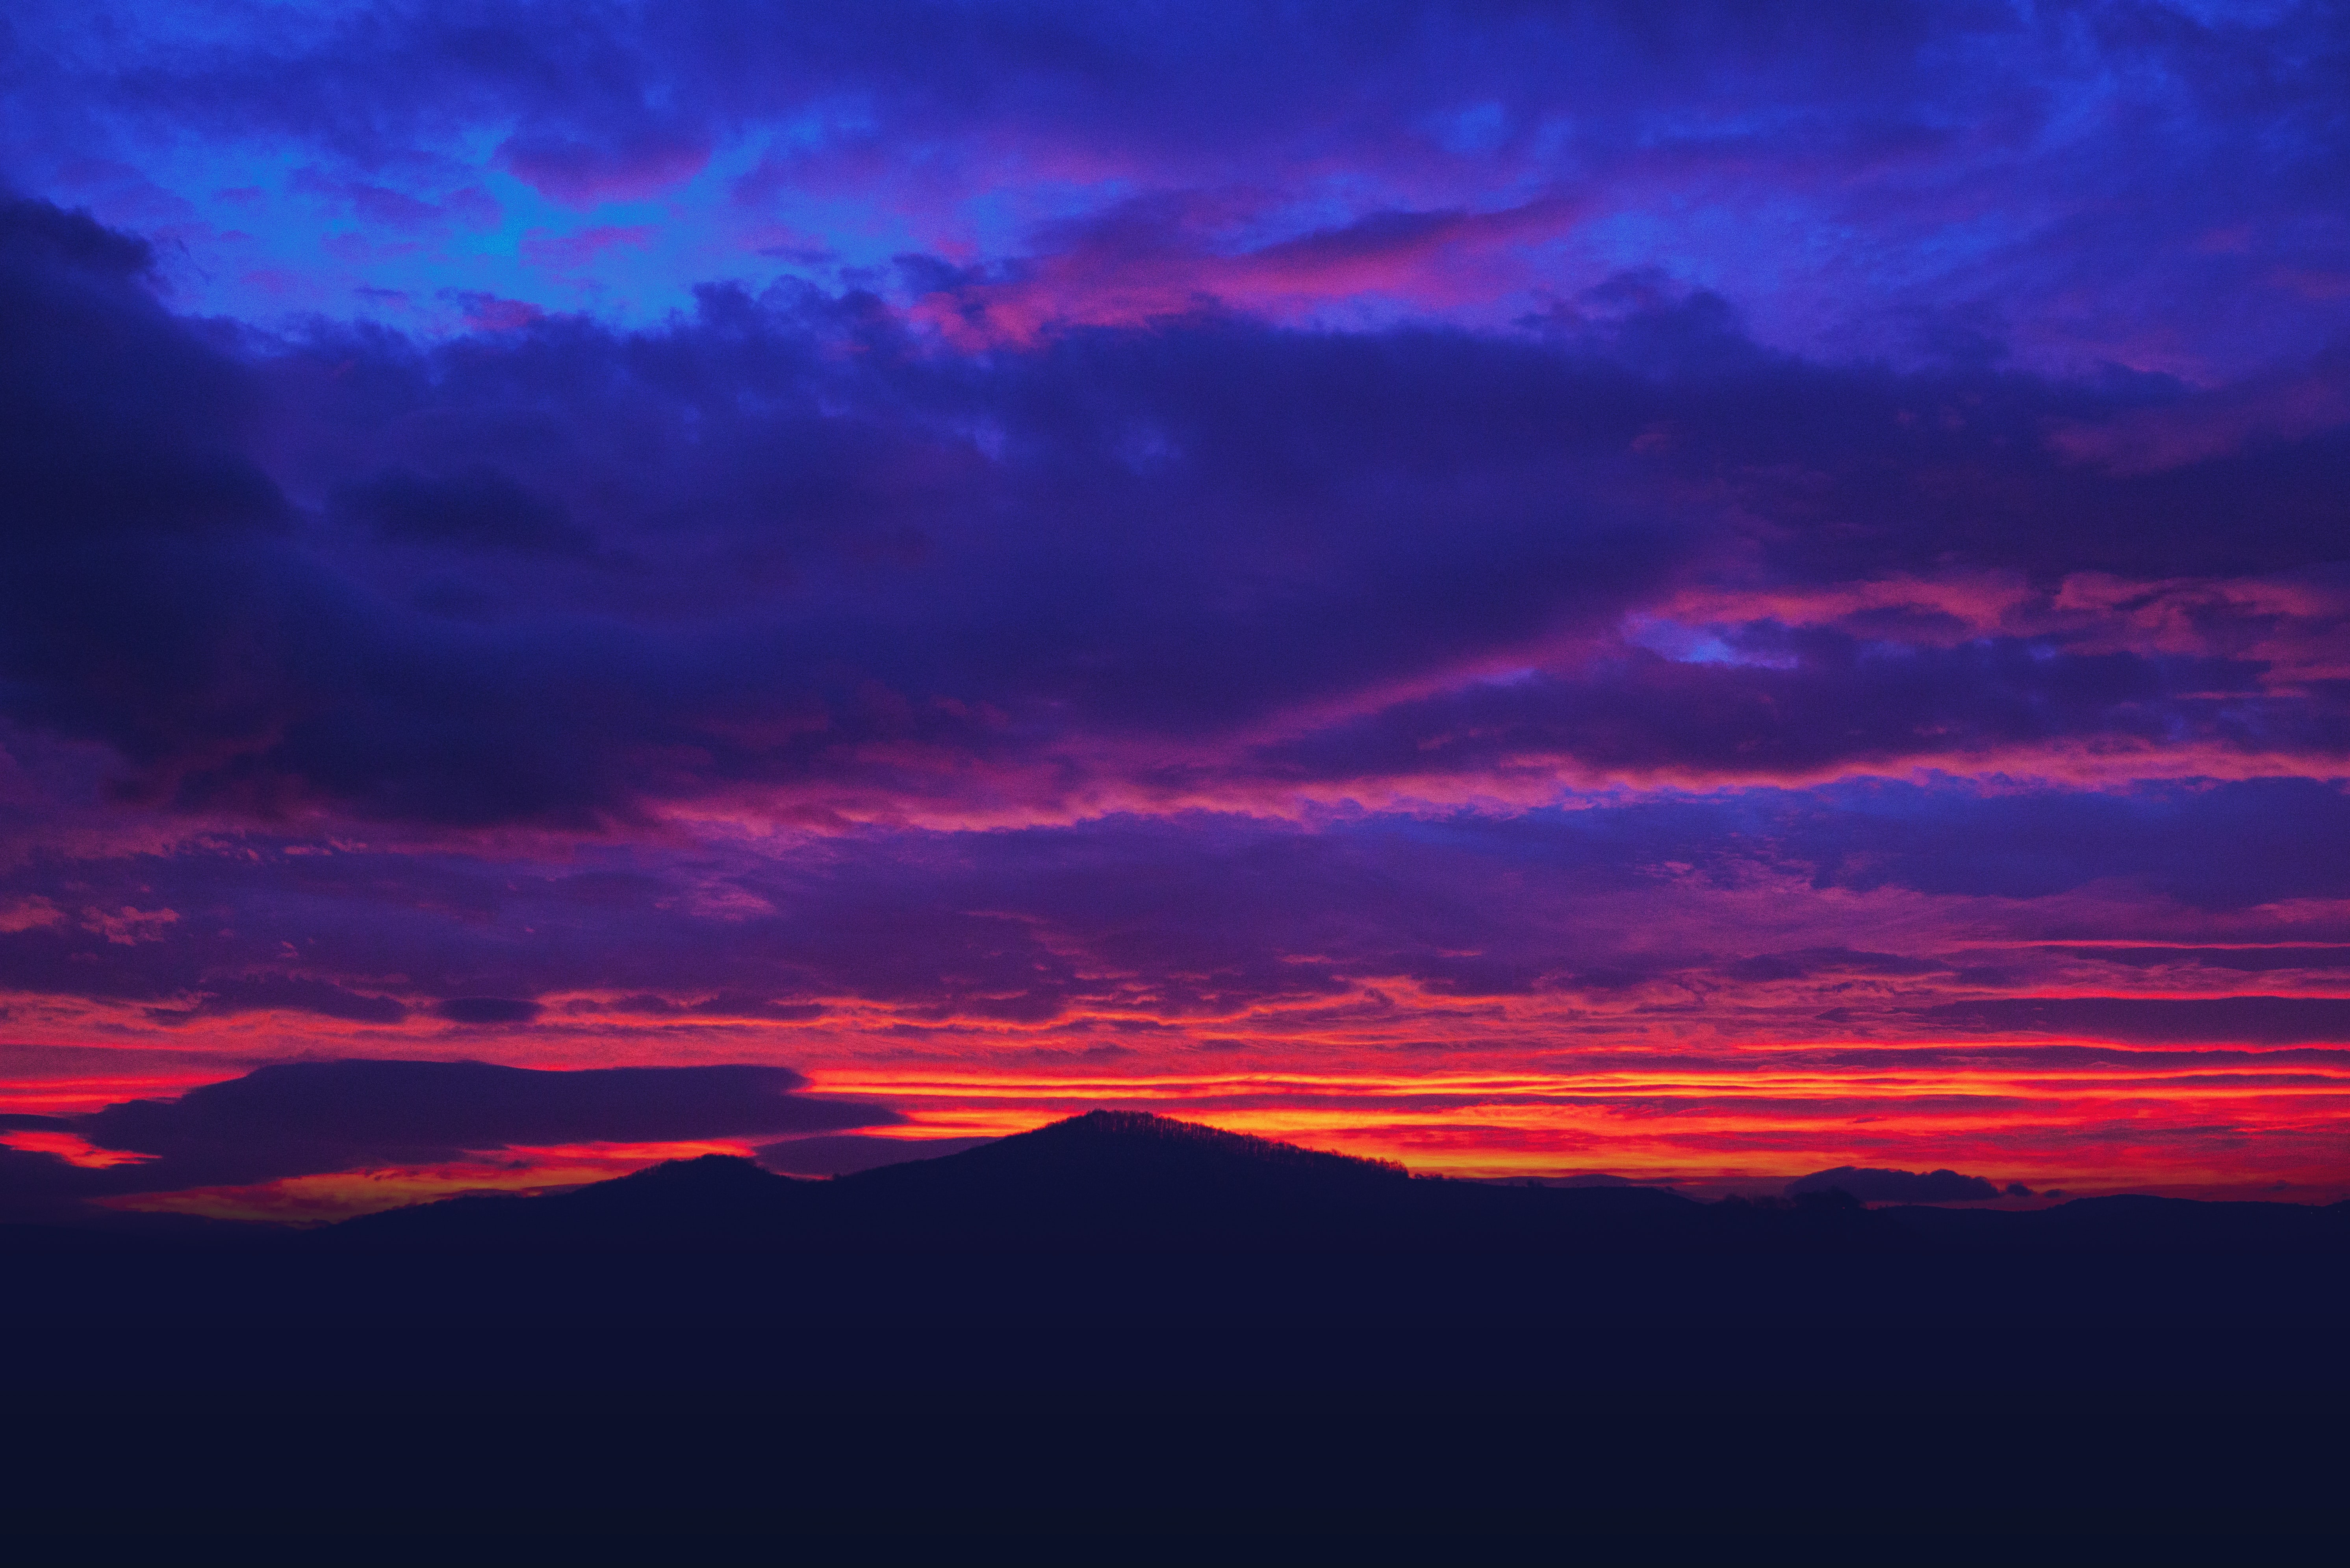 Blue and pink sunset over hills